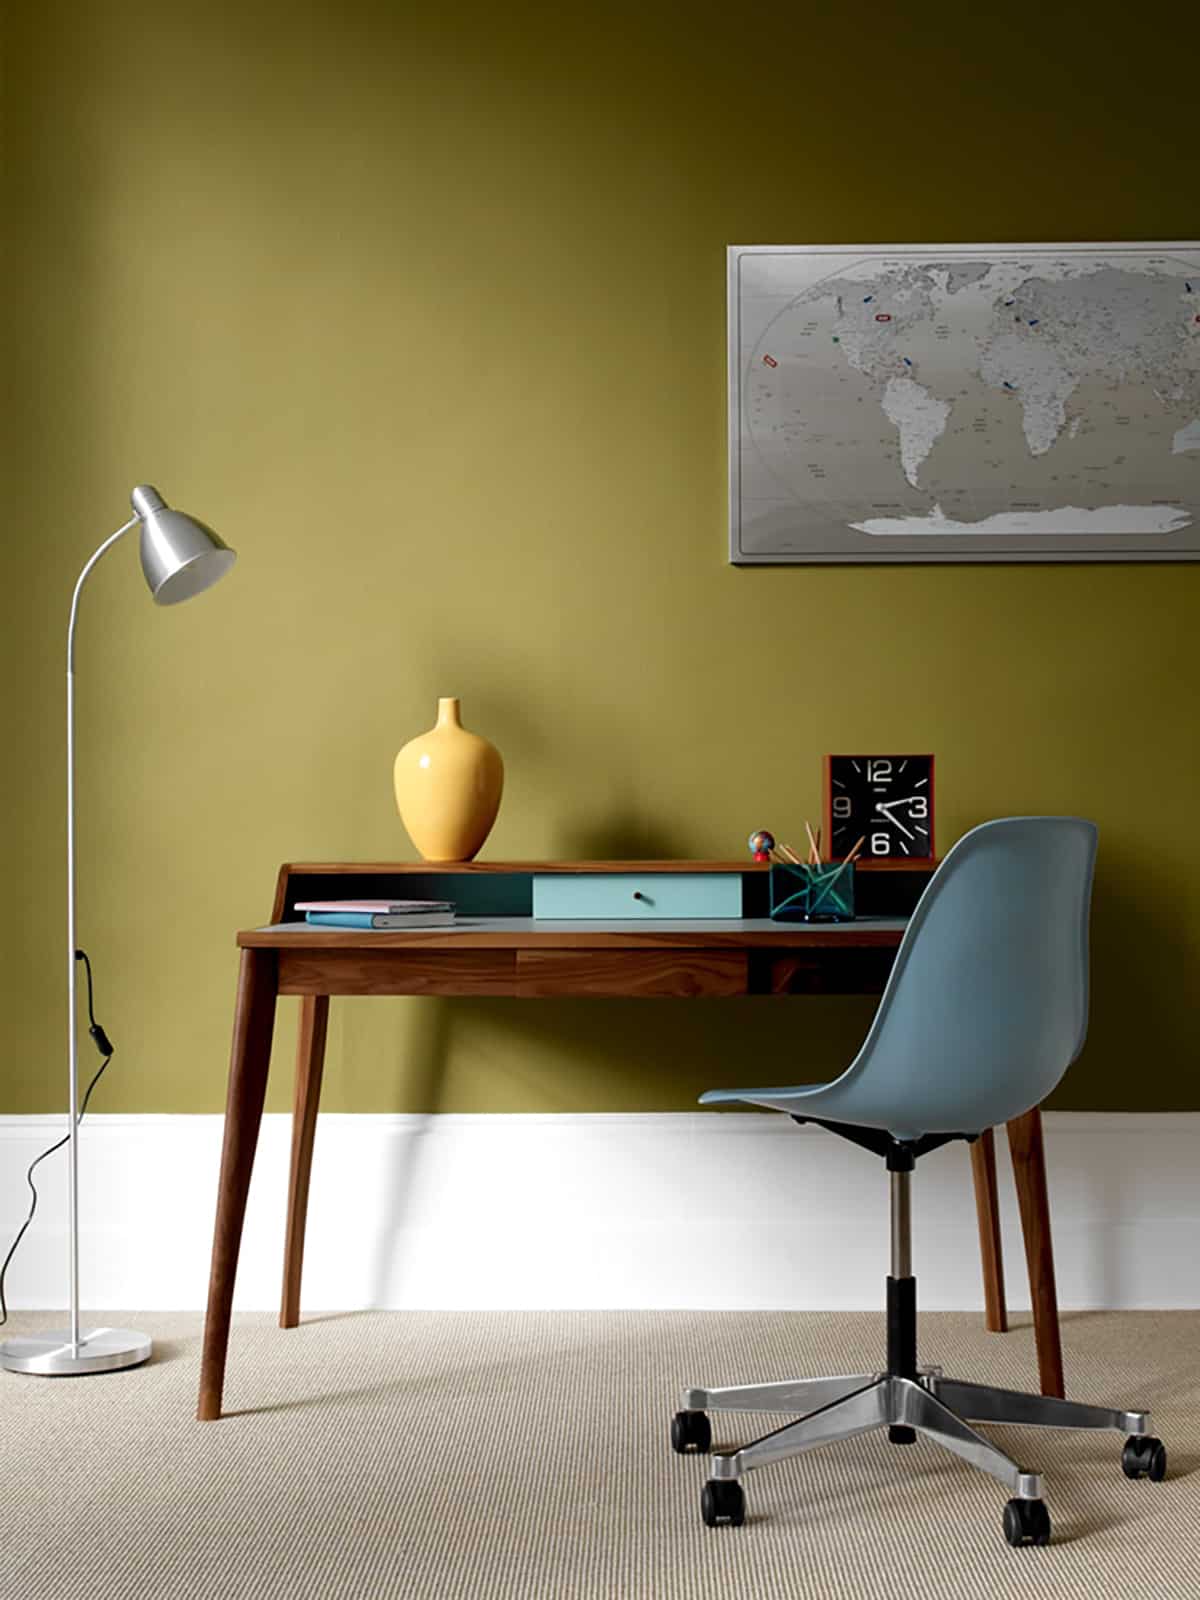 Office table along an olive wall with a map of world hanging on it